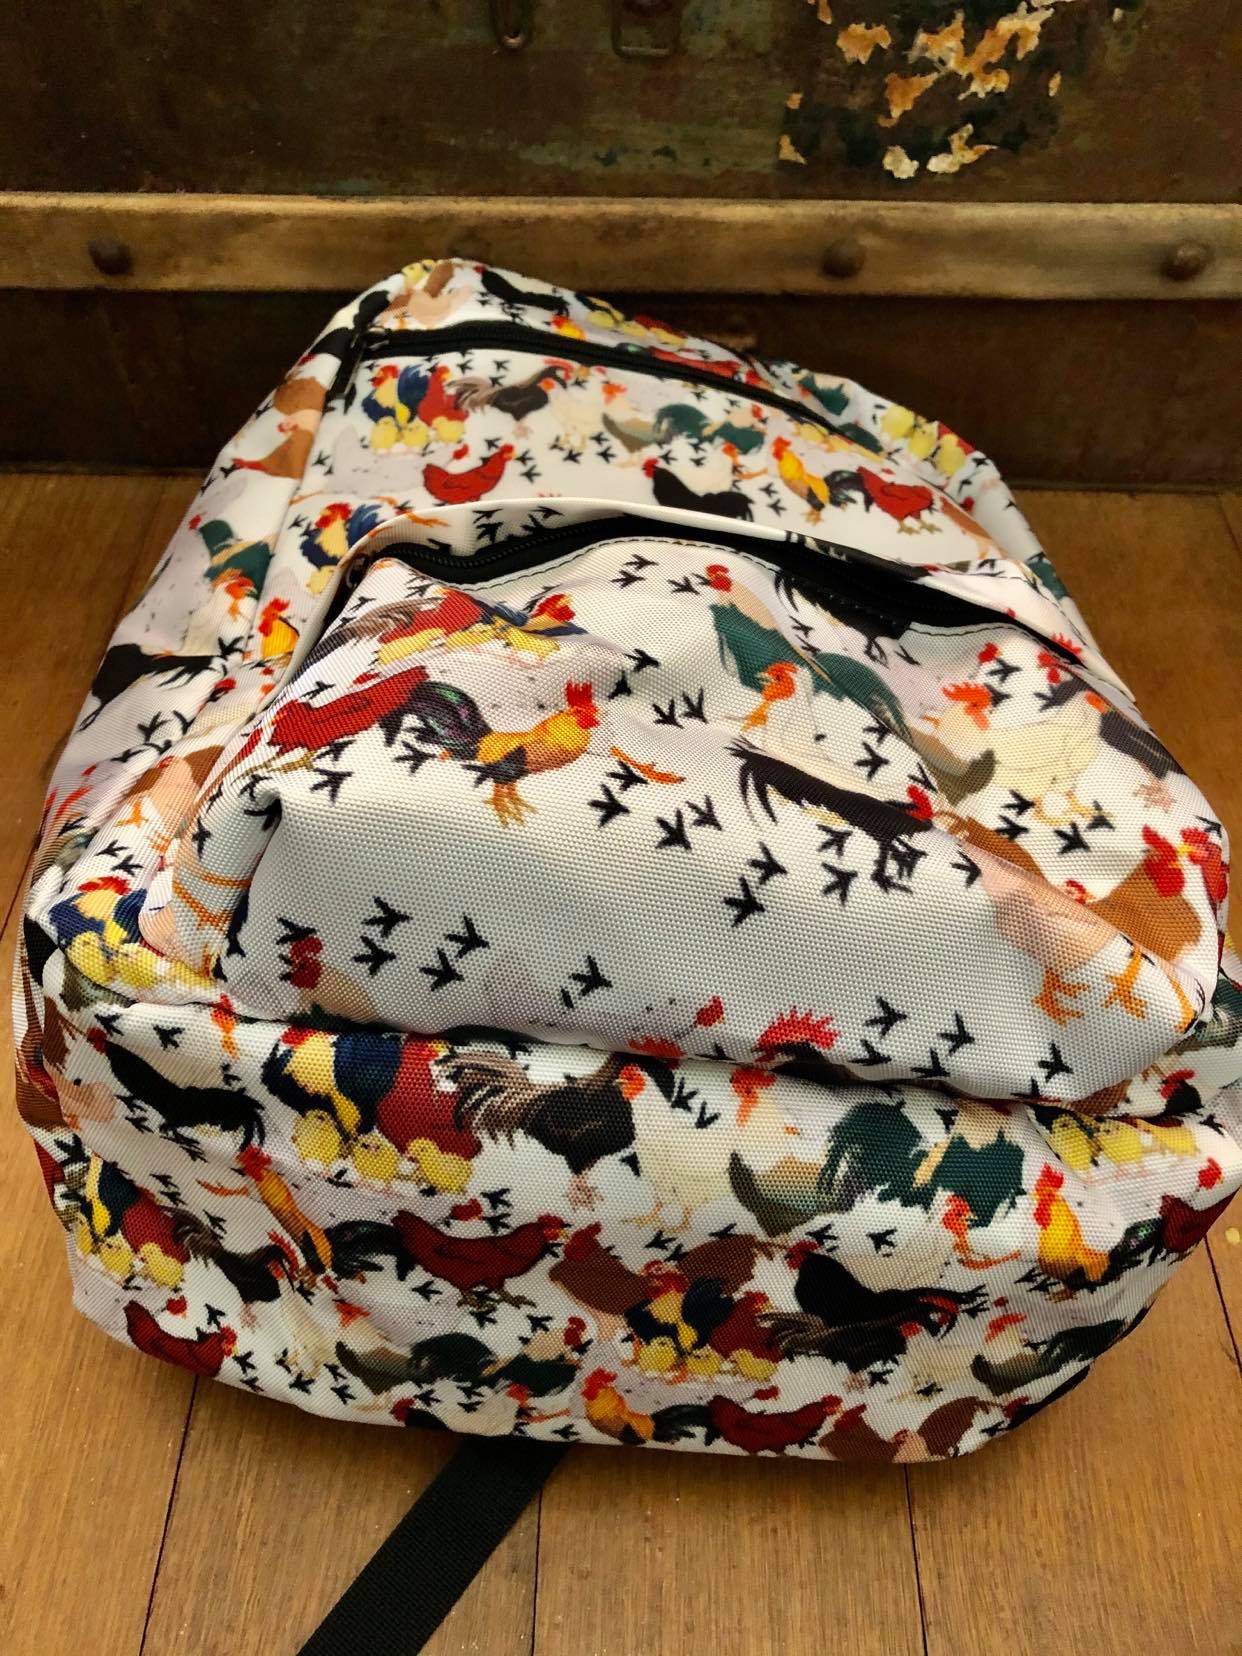 Chicken - Travel Backpack - Little Goody New Shoes Australia